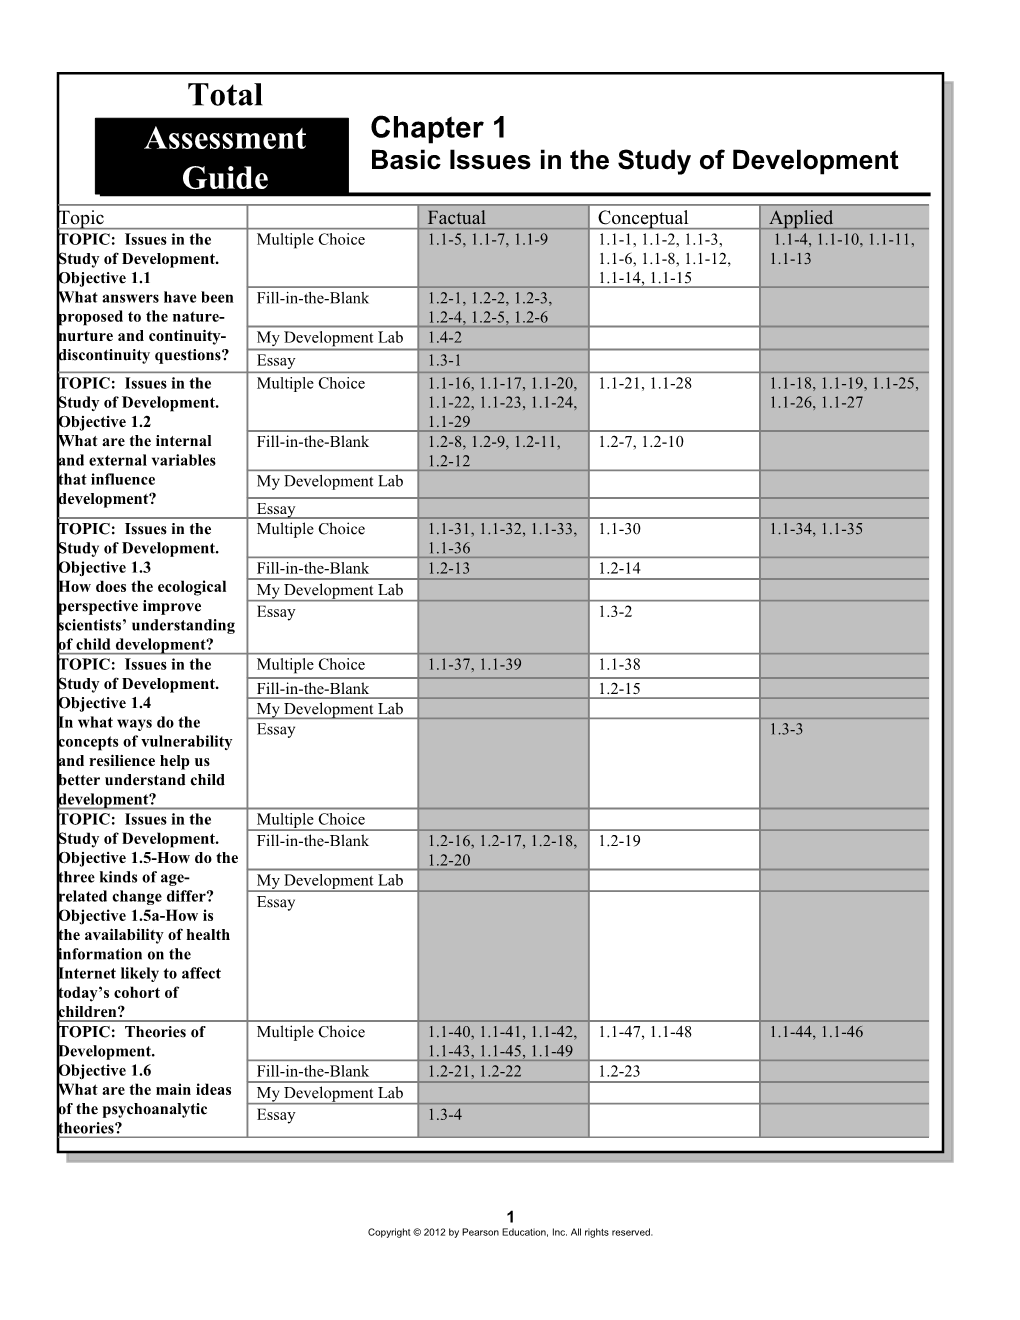 Chapter 1: Basic Issues in the Study of Development s1